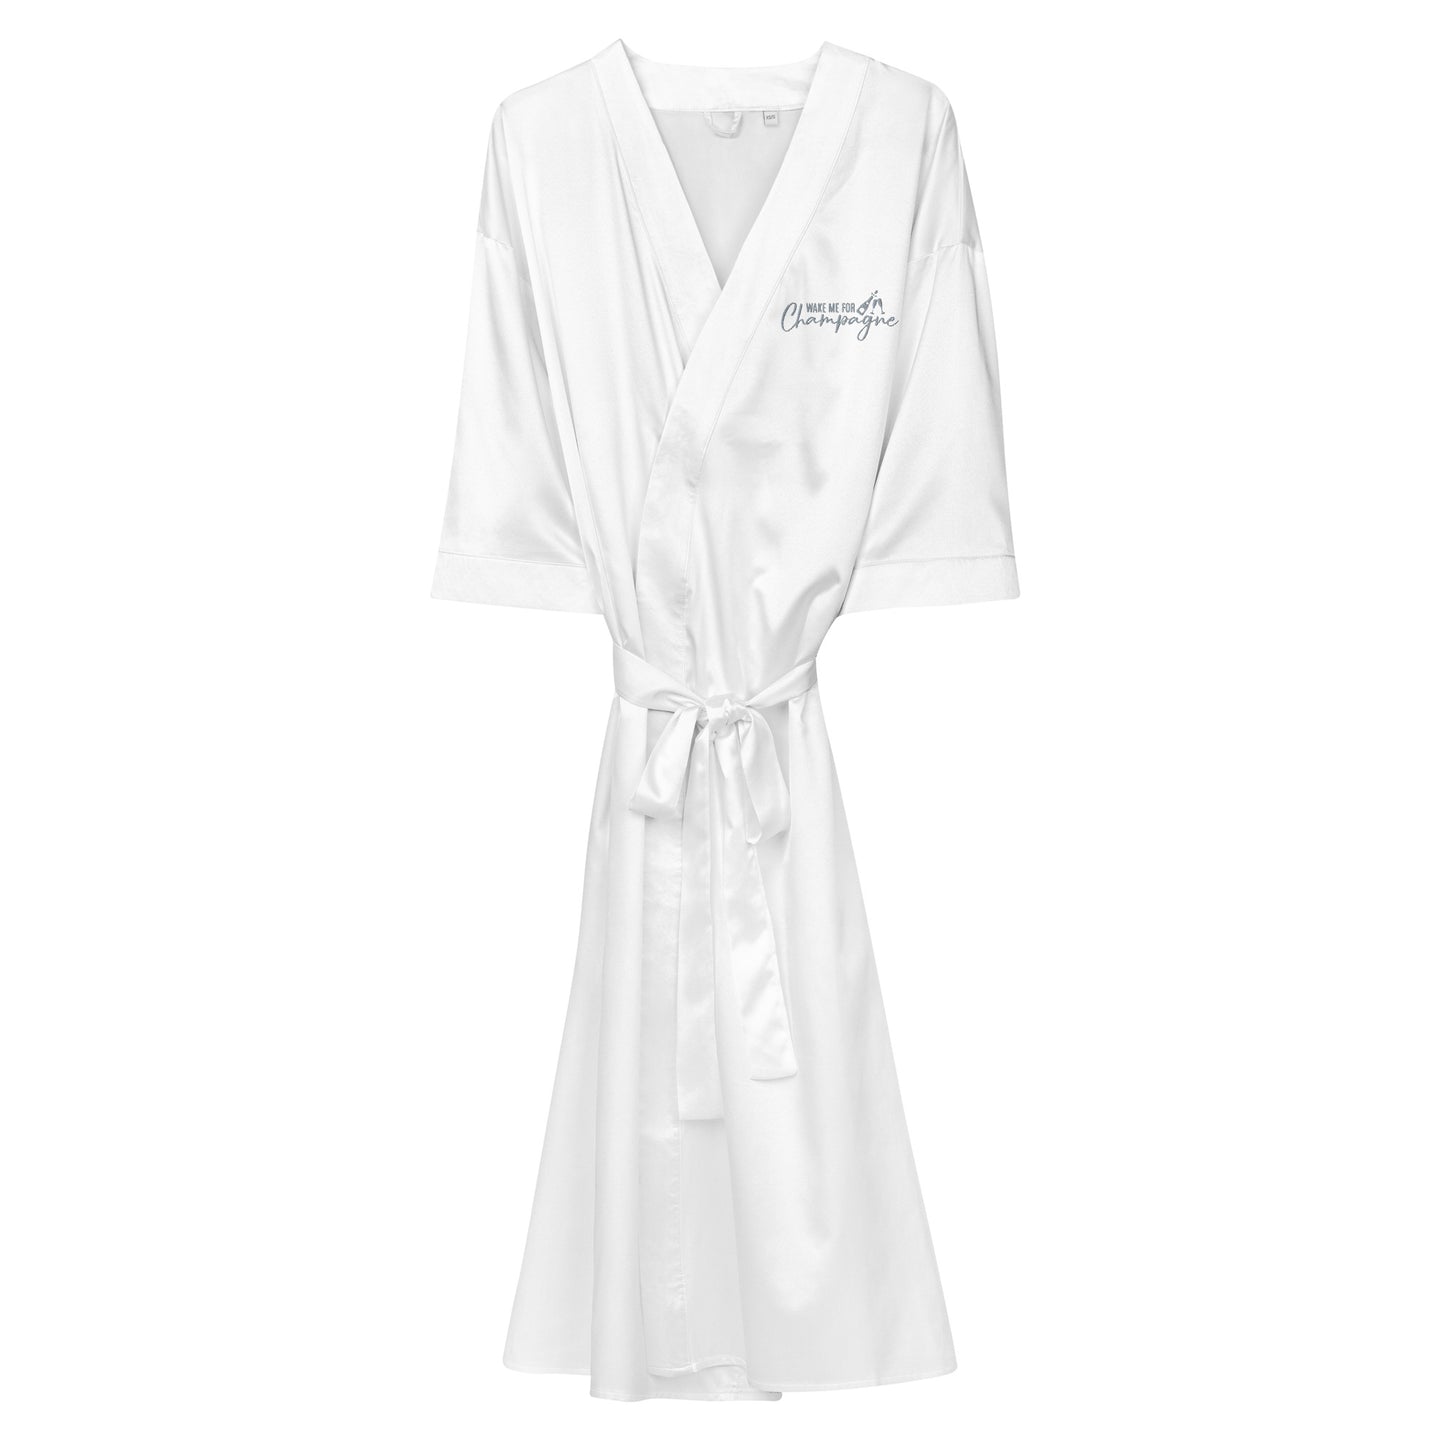 Satin Robe "WAKE ME FOR CHAMPAGNE" Embroidered in Storm Grey on Classic White